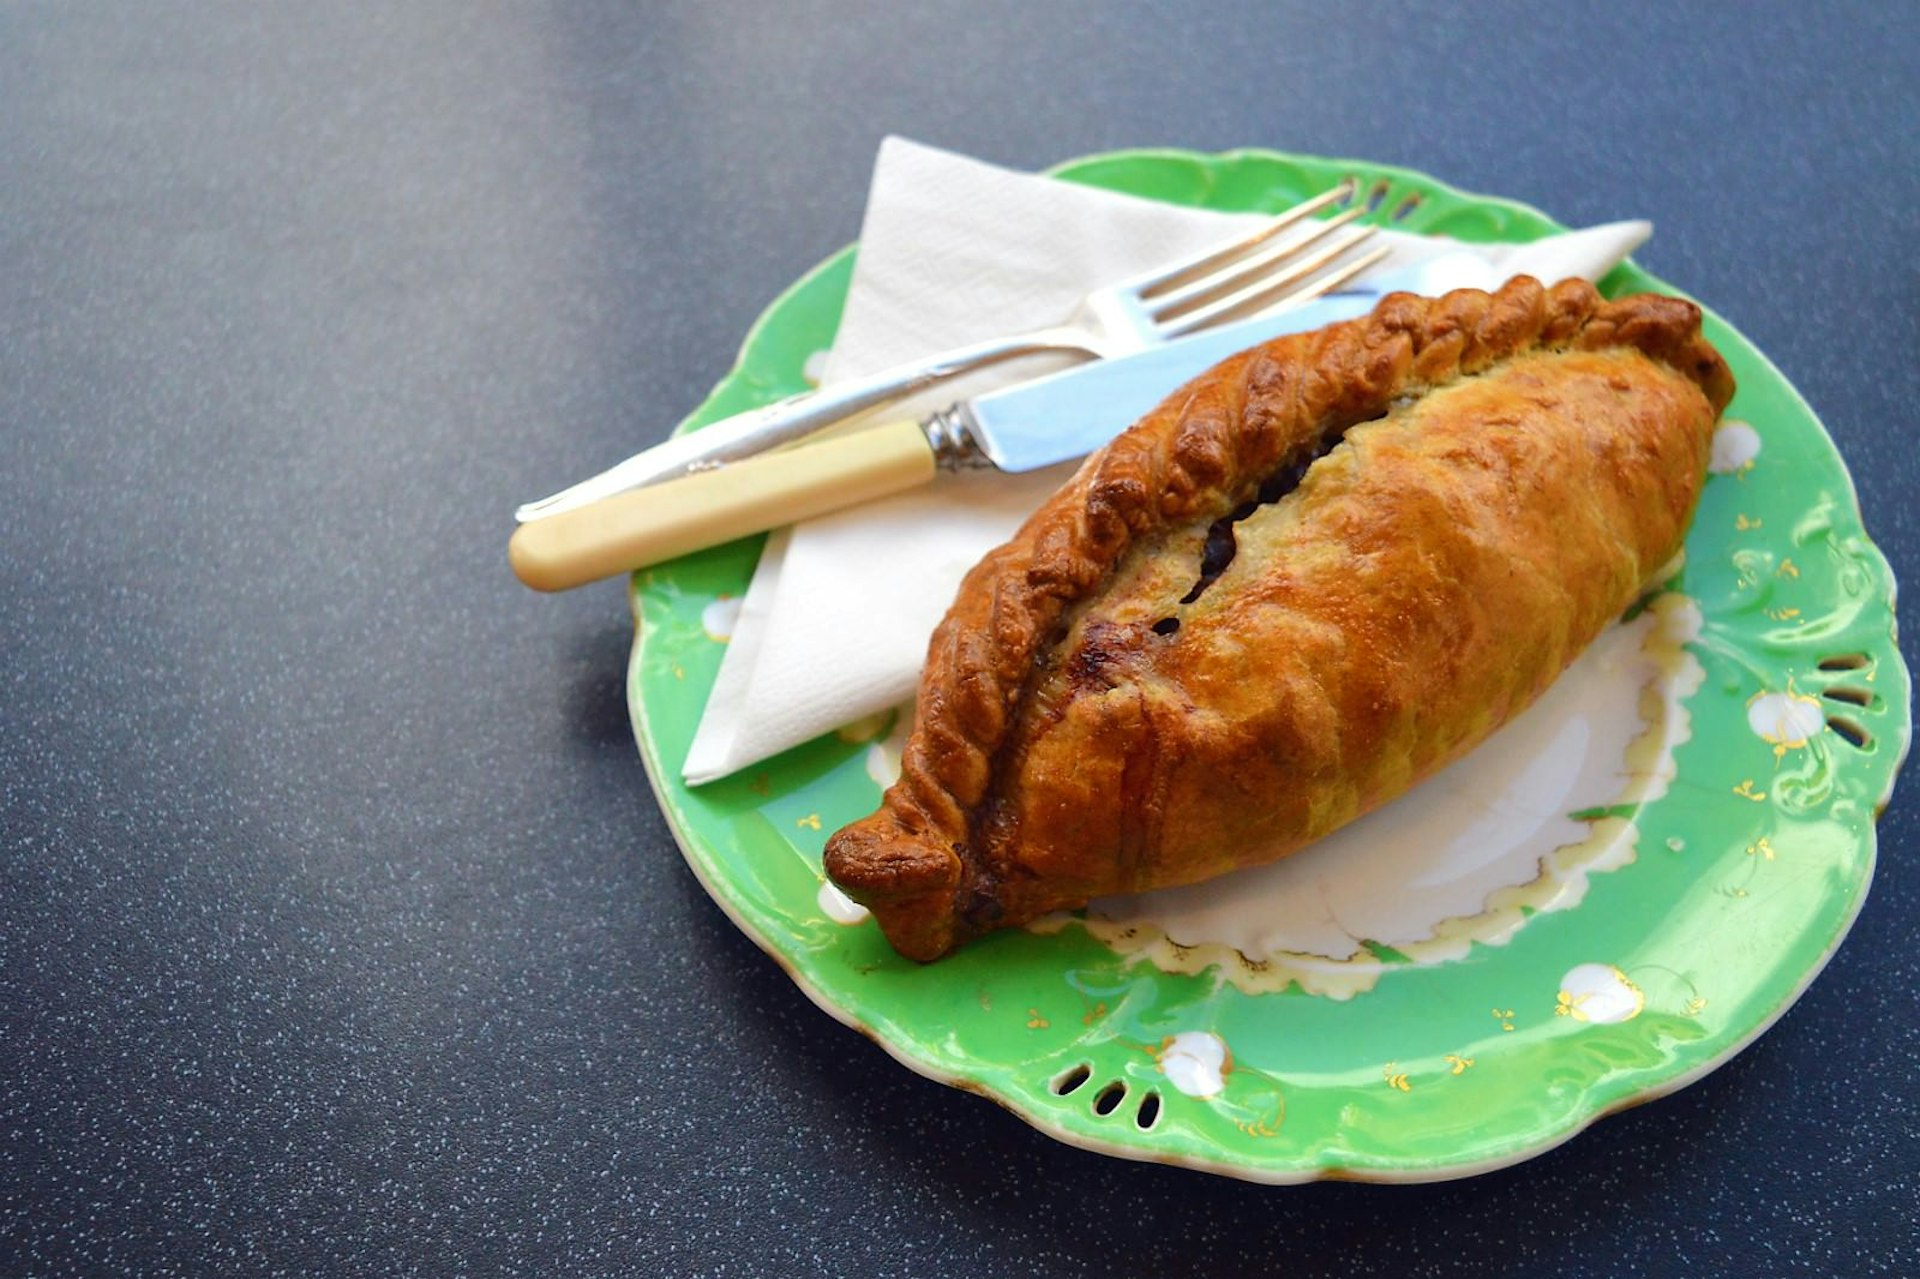 You can't come to Cornwall and not try a pasty © Emma Sparks / Lonely Planet